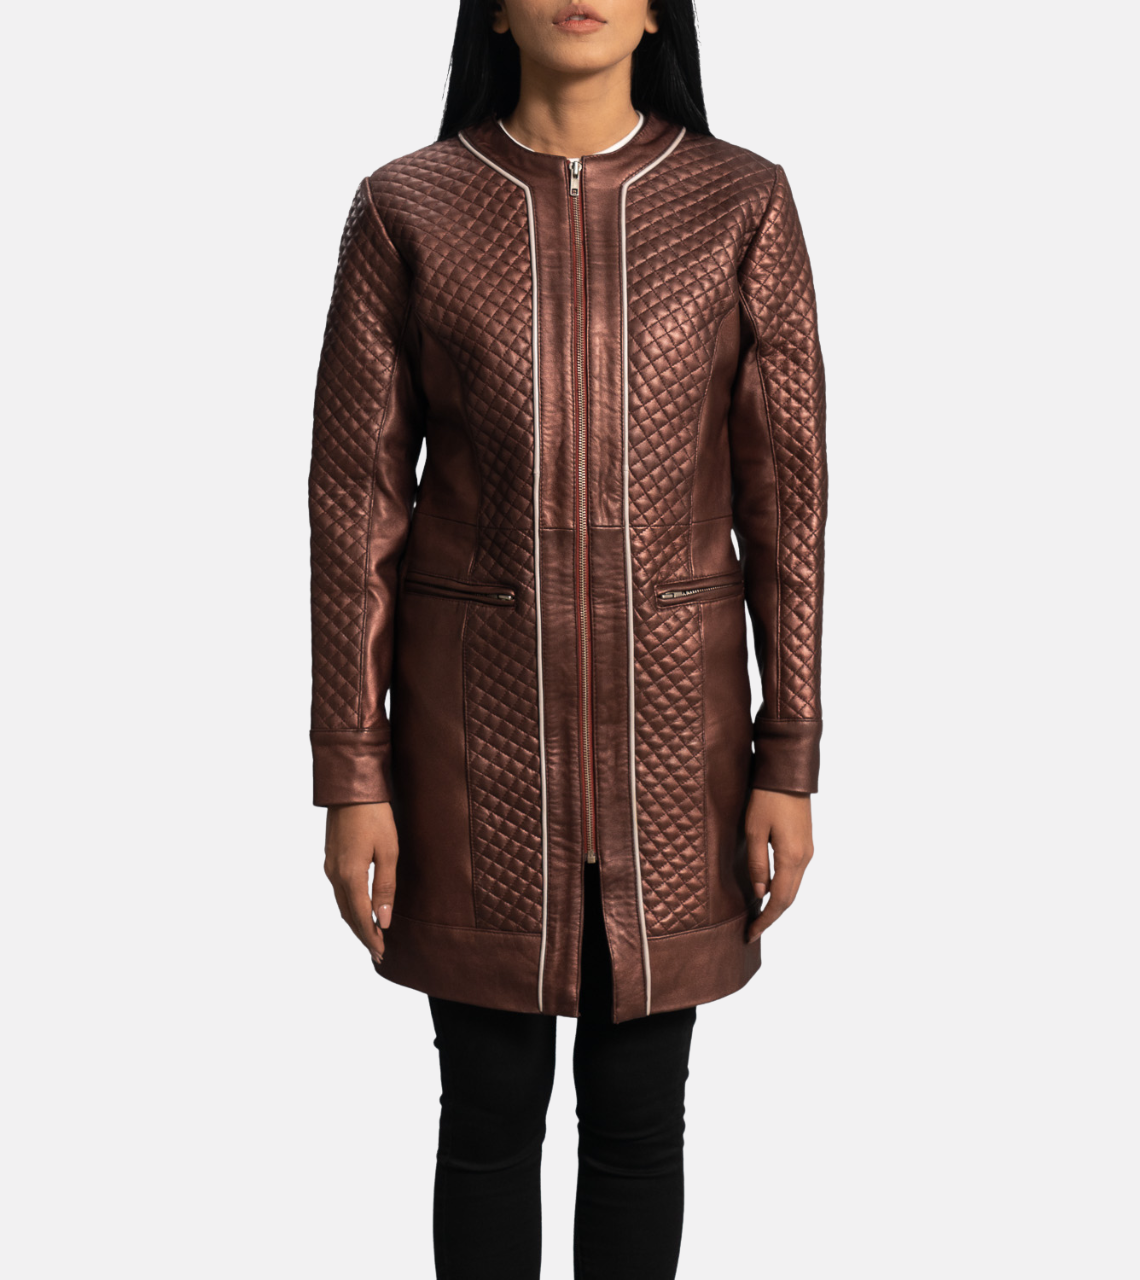 Trudy Lane Quilted Maroon Leather Coat For Women's